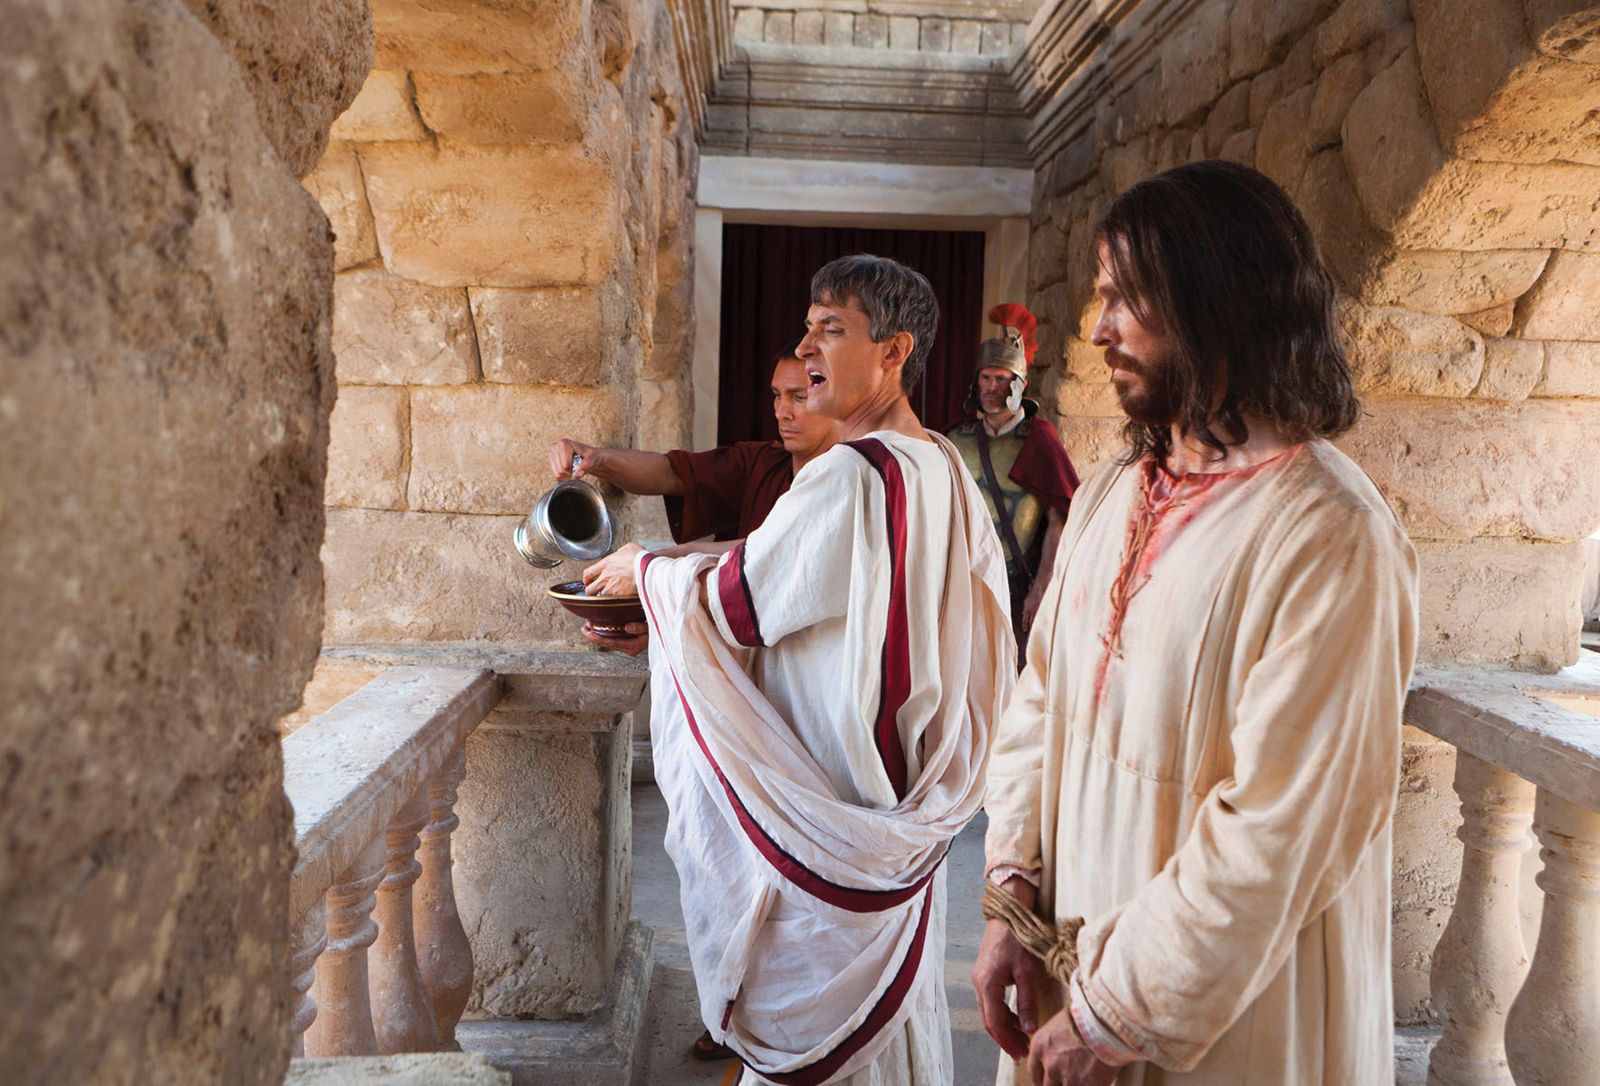 Pilate speaks to the people in the crowd and washes his hands of their accusations of Christ.